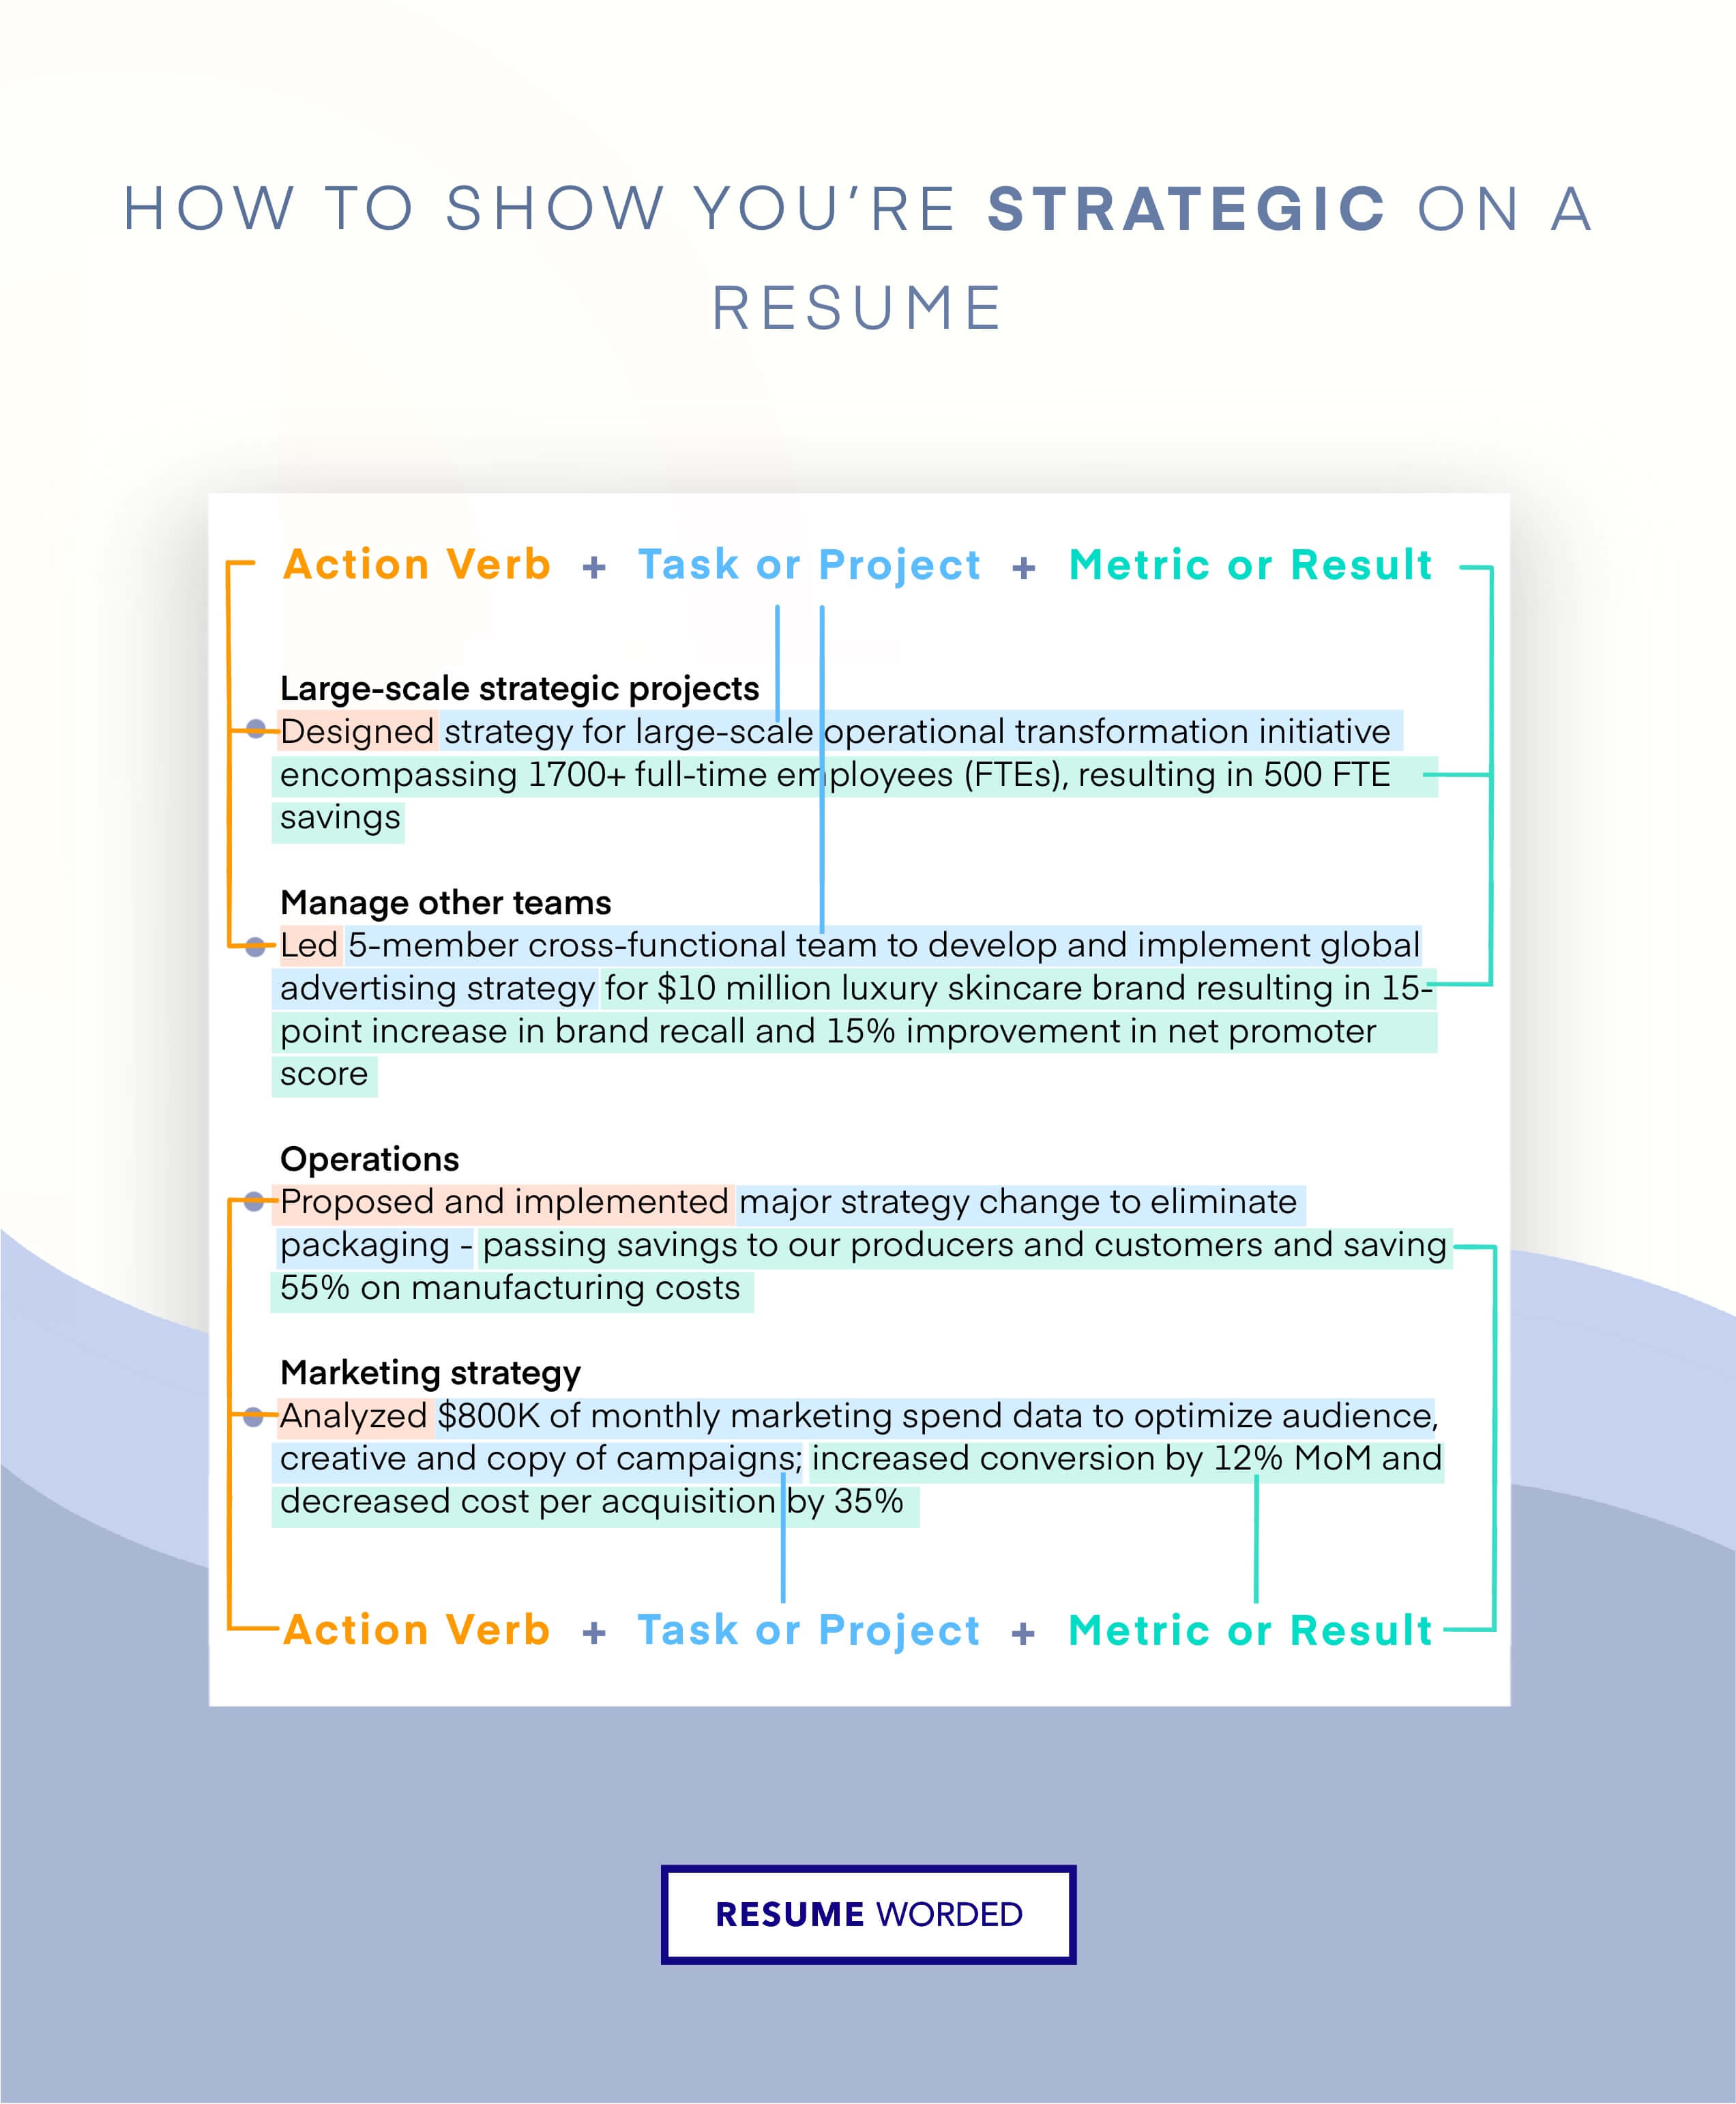 Showcase your capacity for strategic thinking - Campaign Manager CV